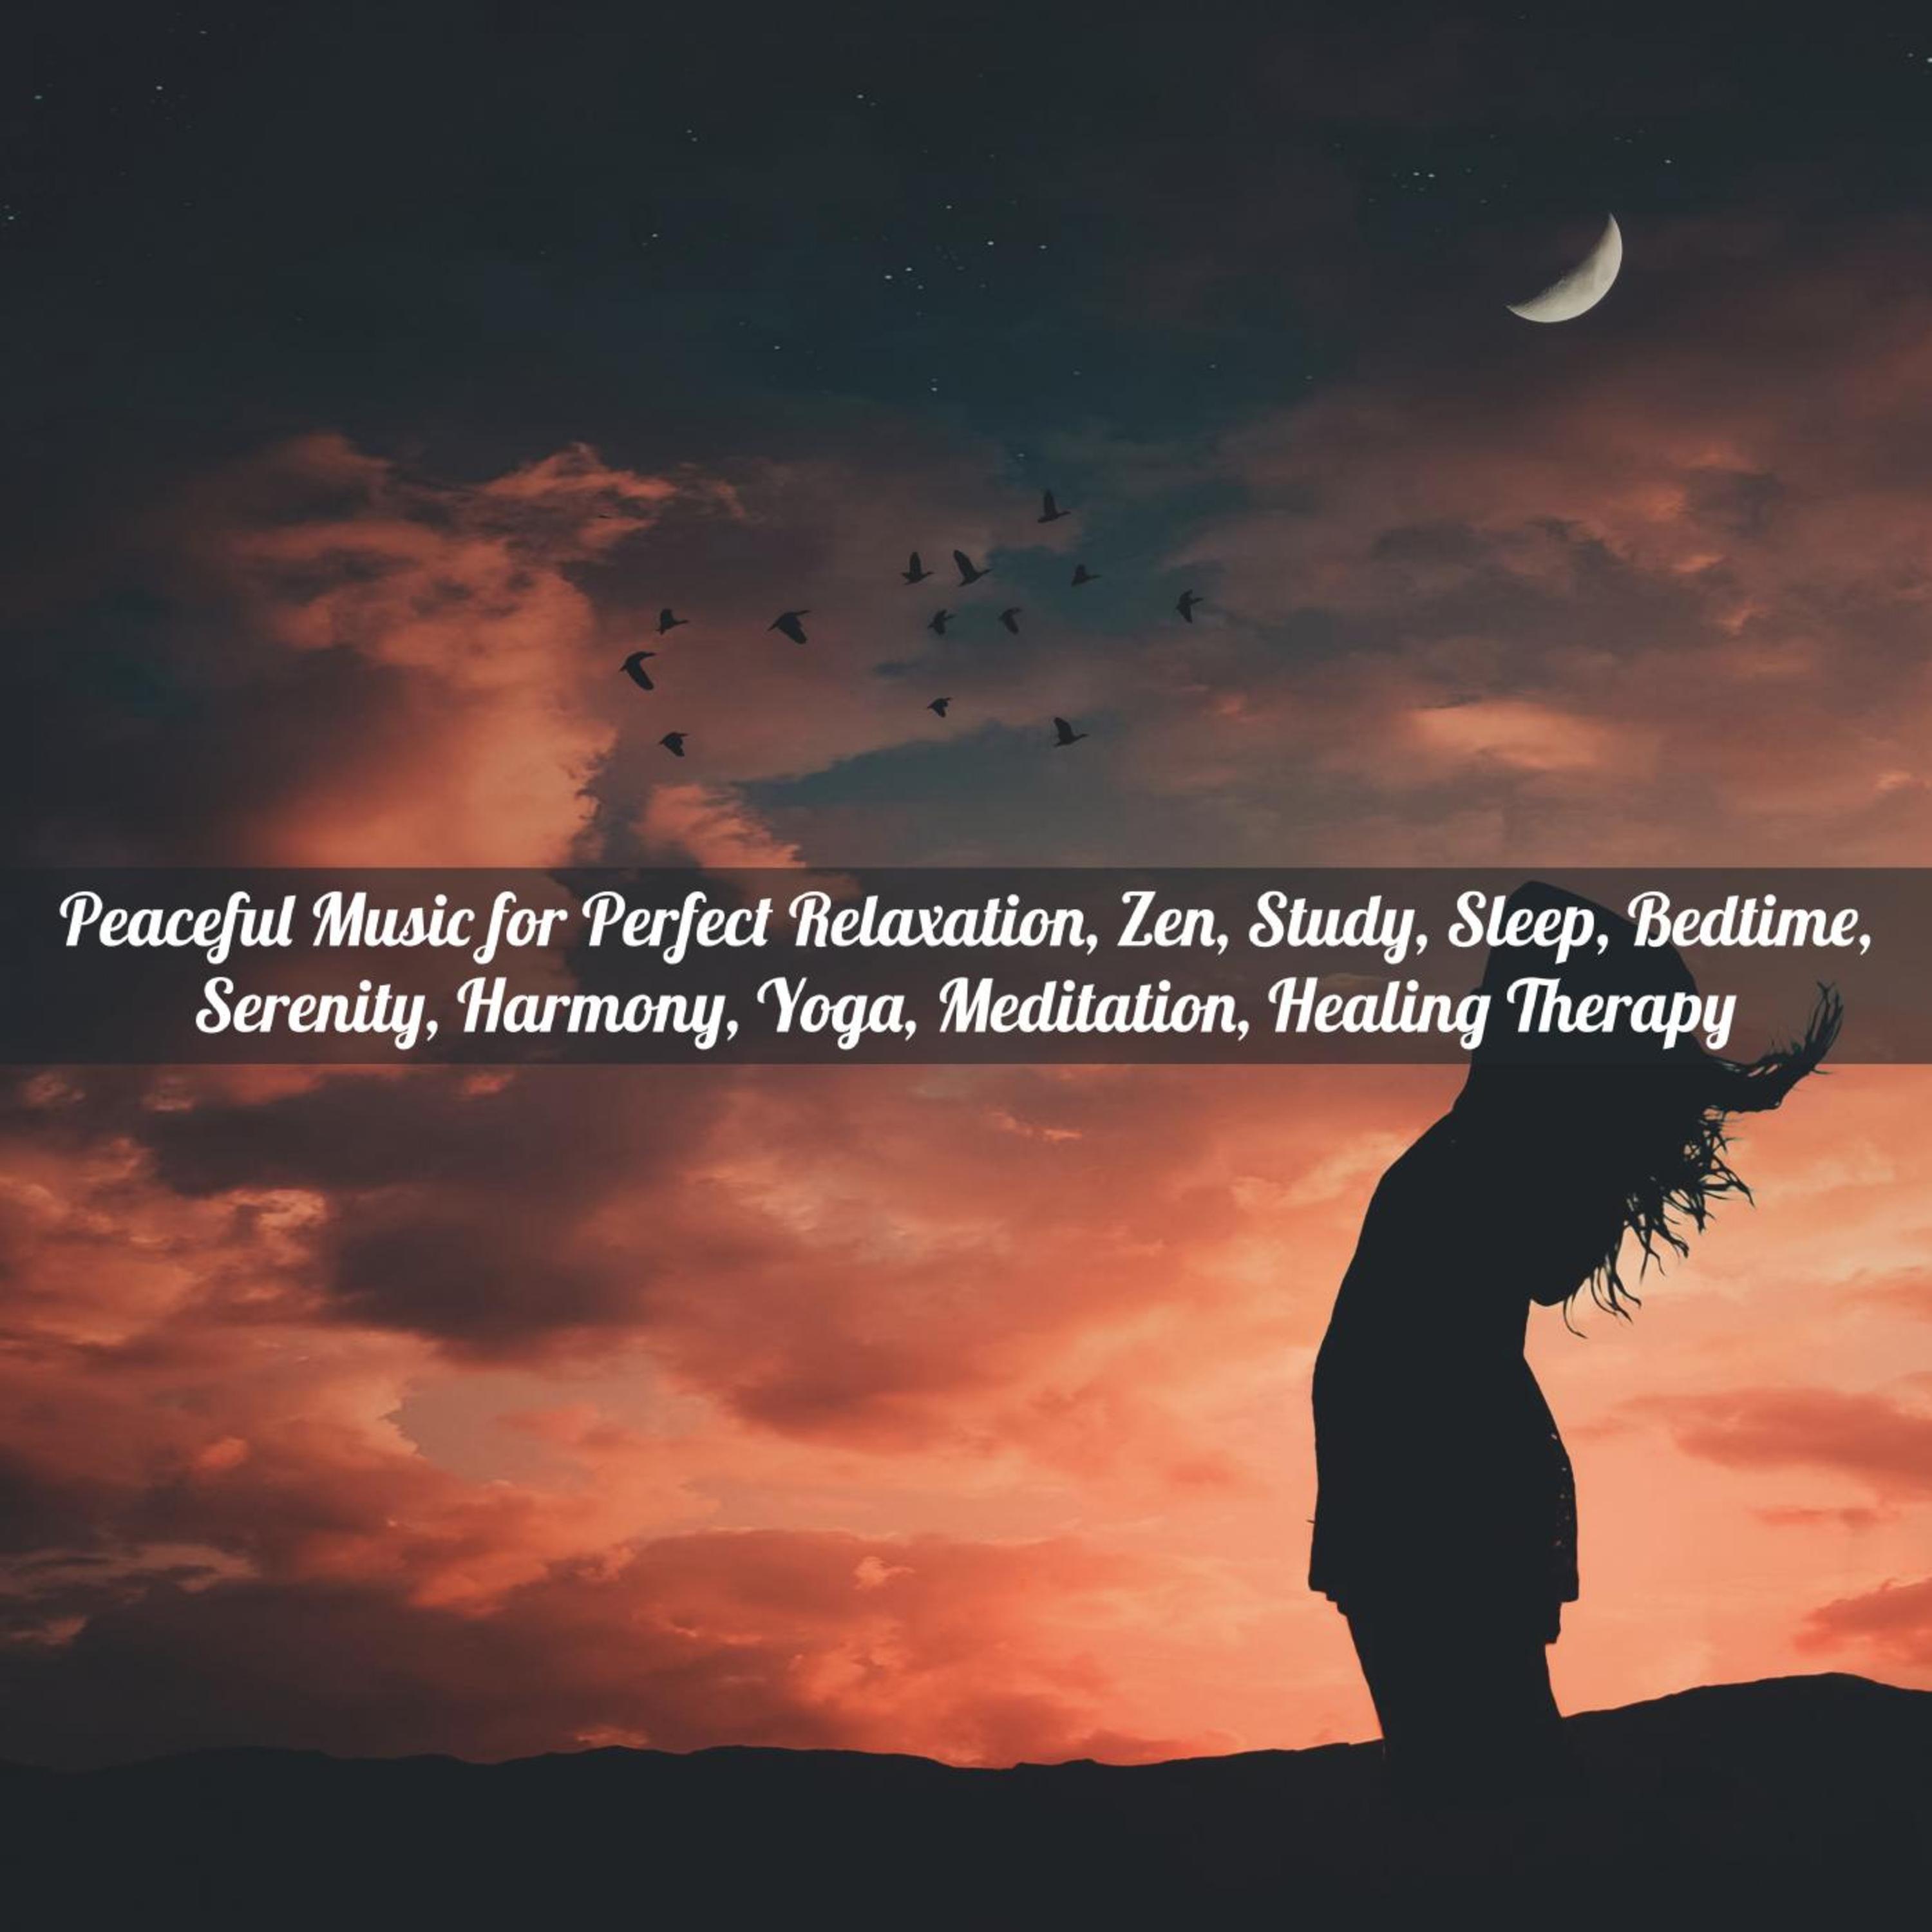 Peaceful Music for Perfect Relaxation, Zen, Study, Sleep, Bedtime, Serenity, Harmony, Yoga, Meditation, Healing Therapy